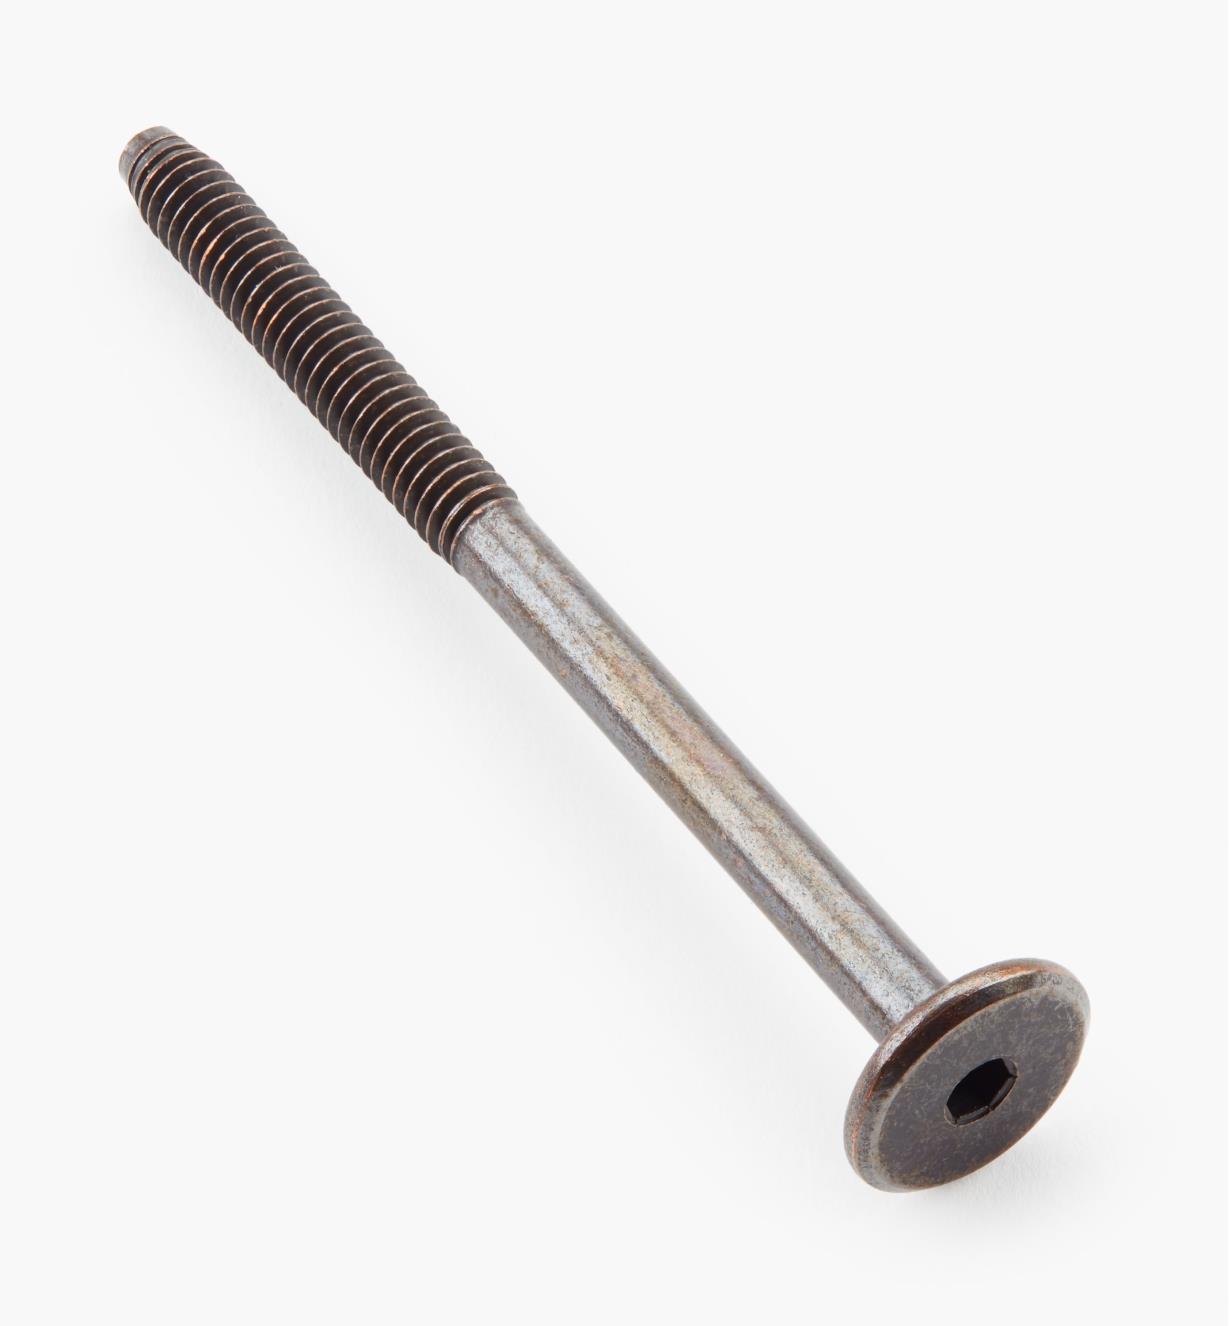 00N1590 - 90mm Large Head Bolt, 1/4-20 Quick-Connect